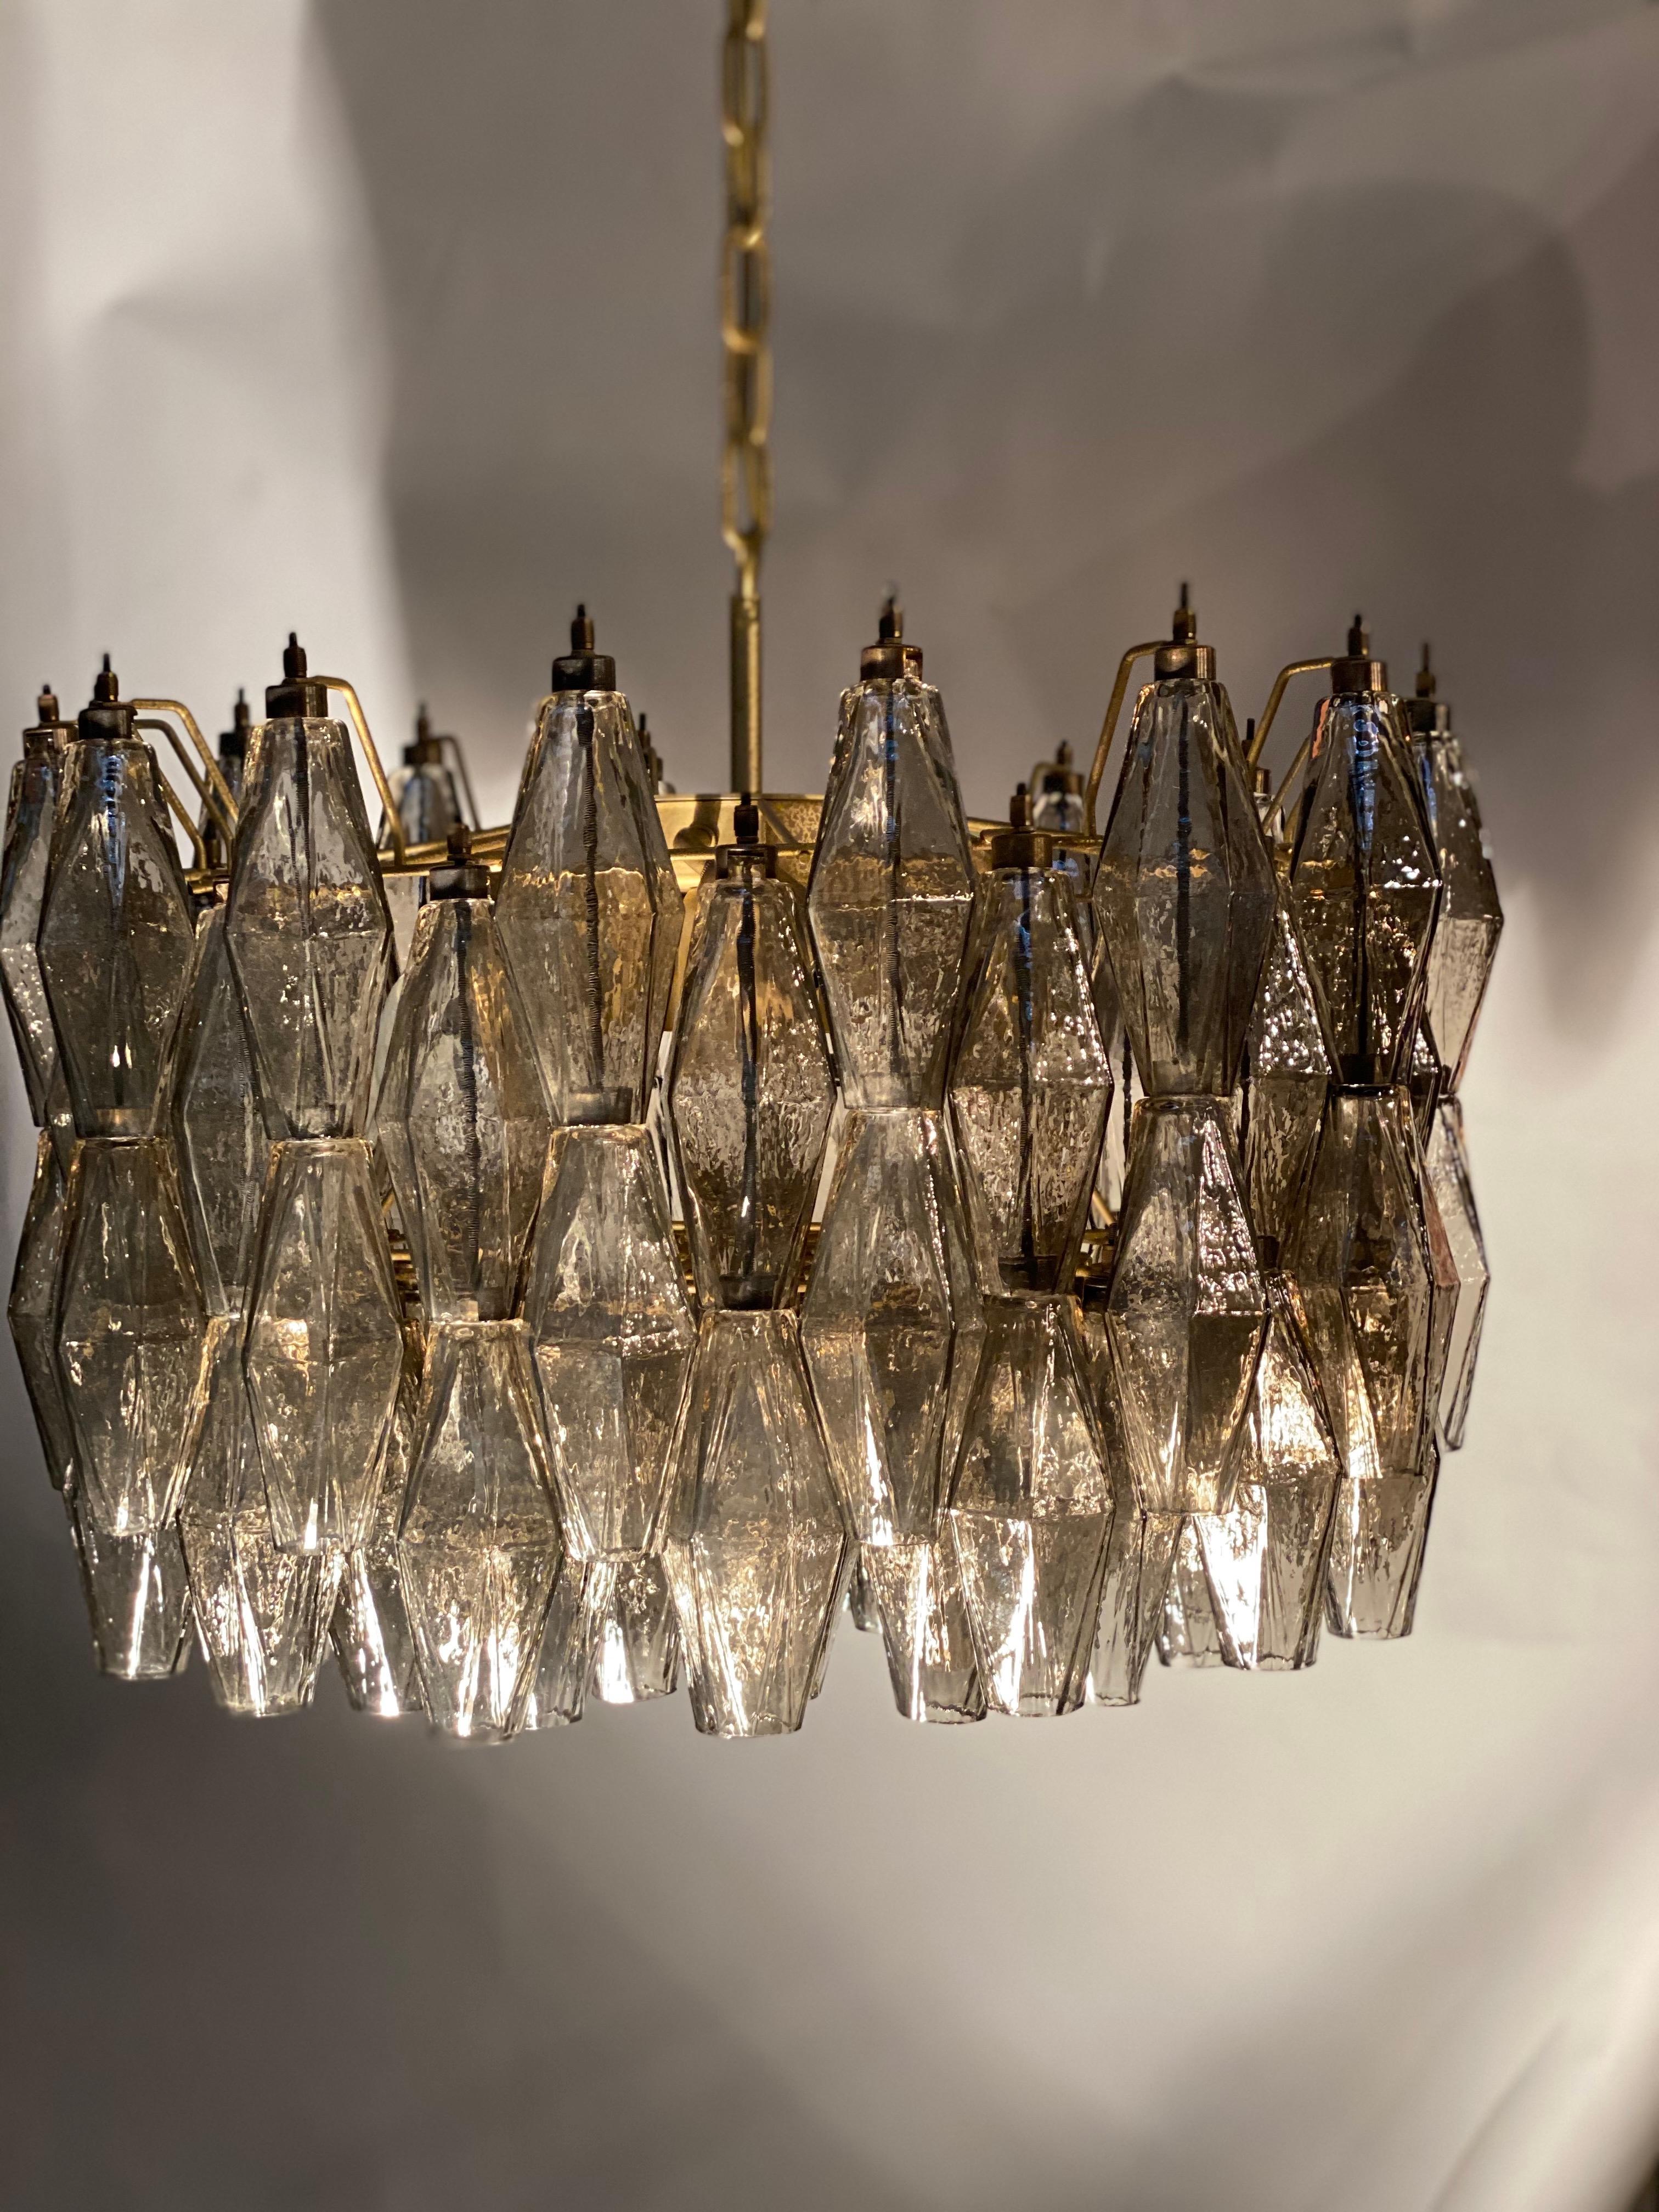 The chandelier consists of 103 hand blown grey 